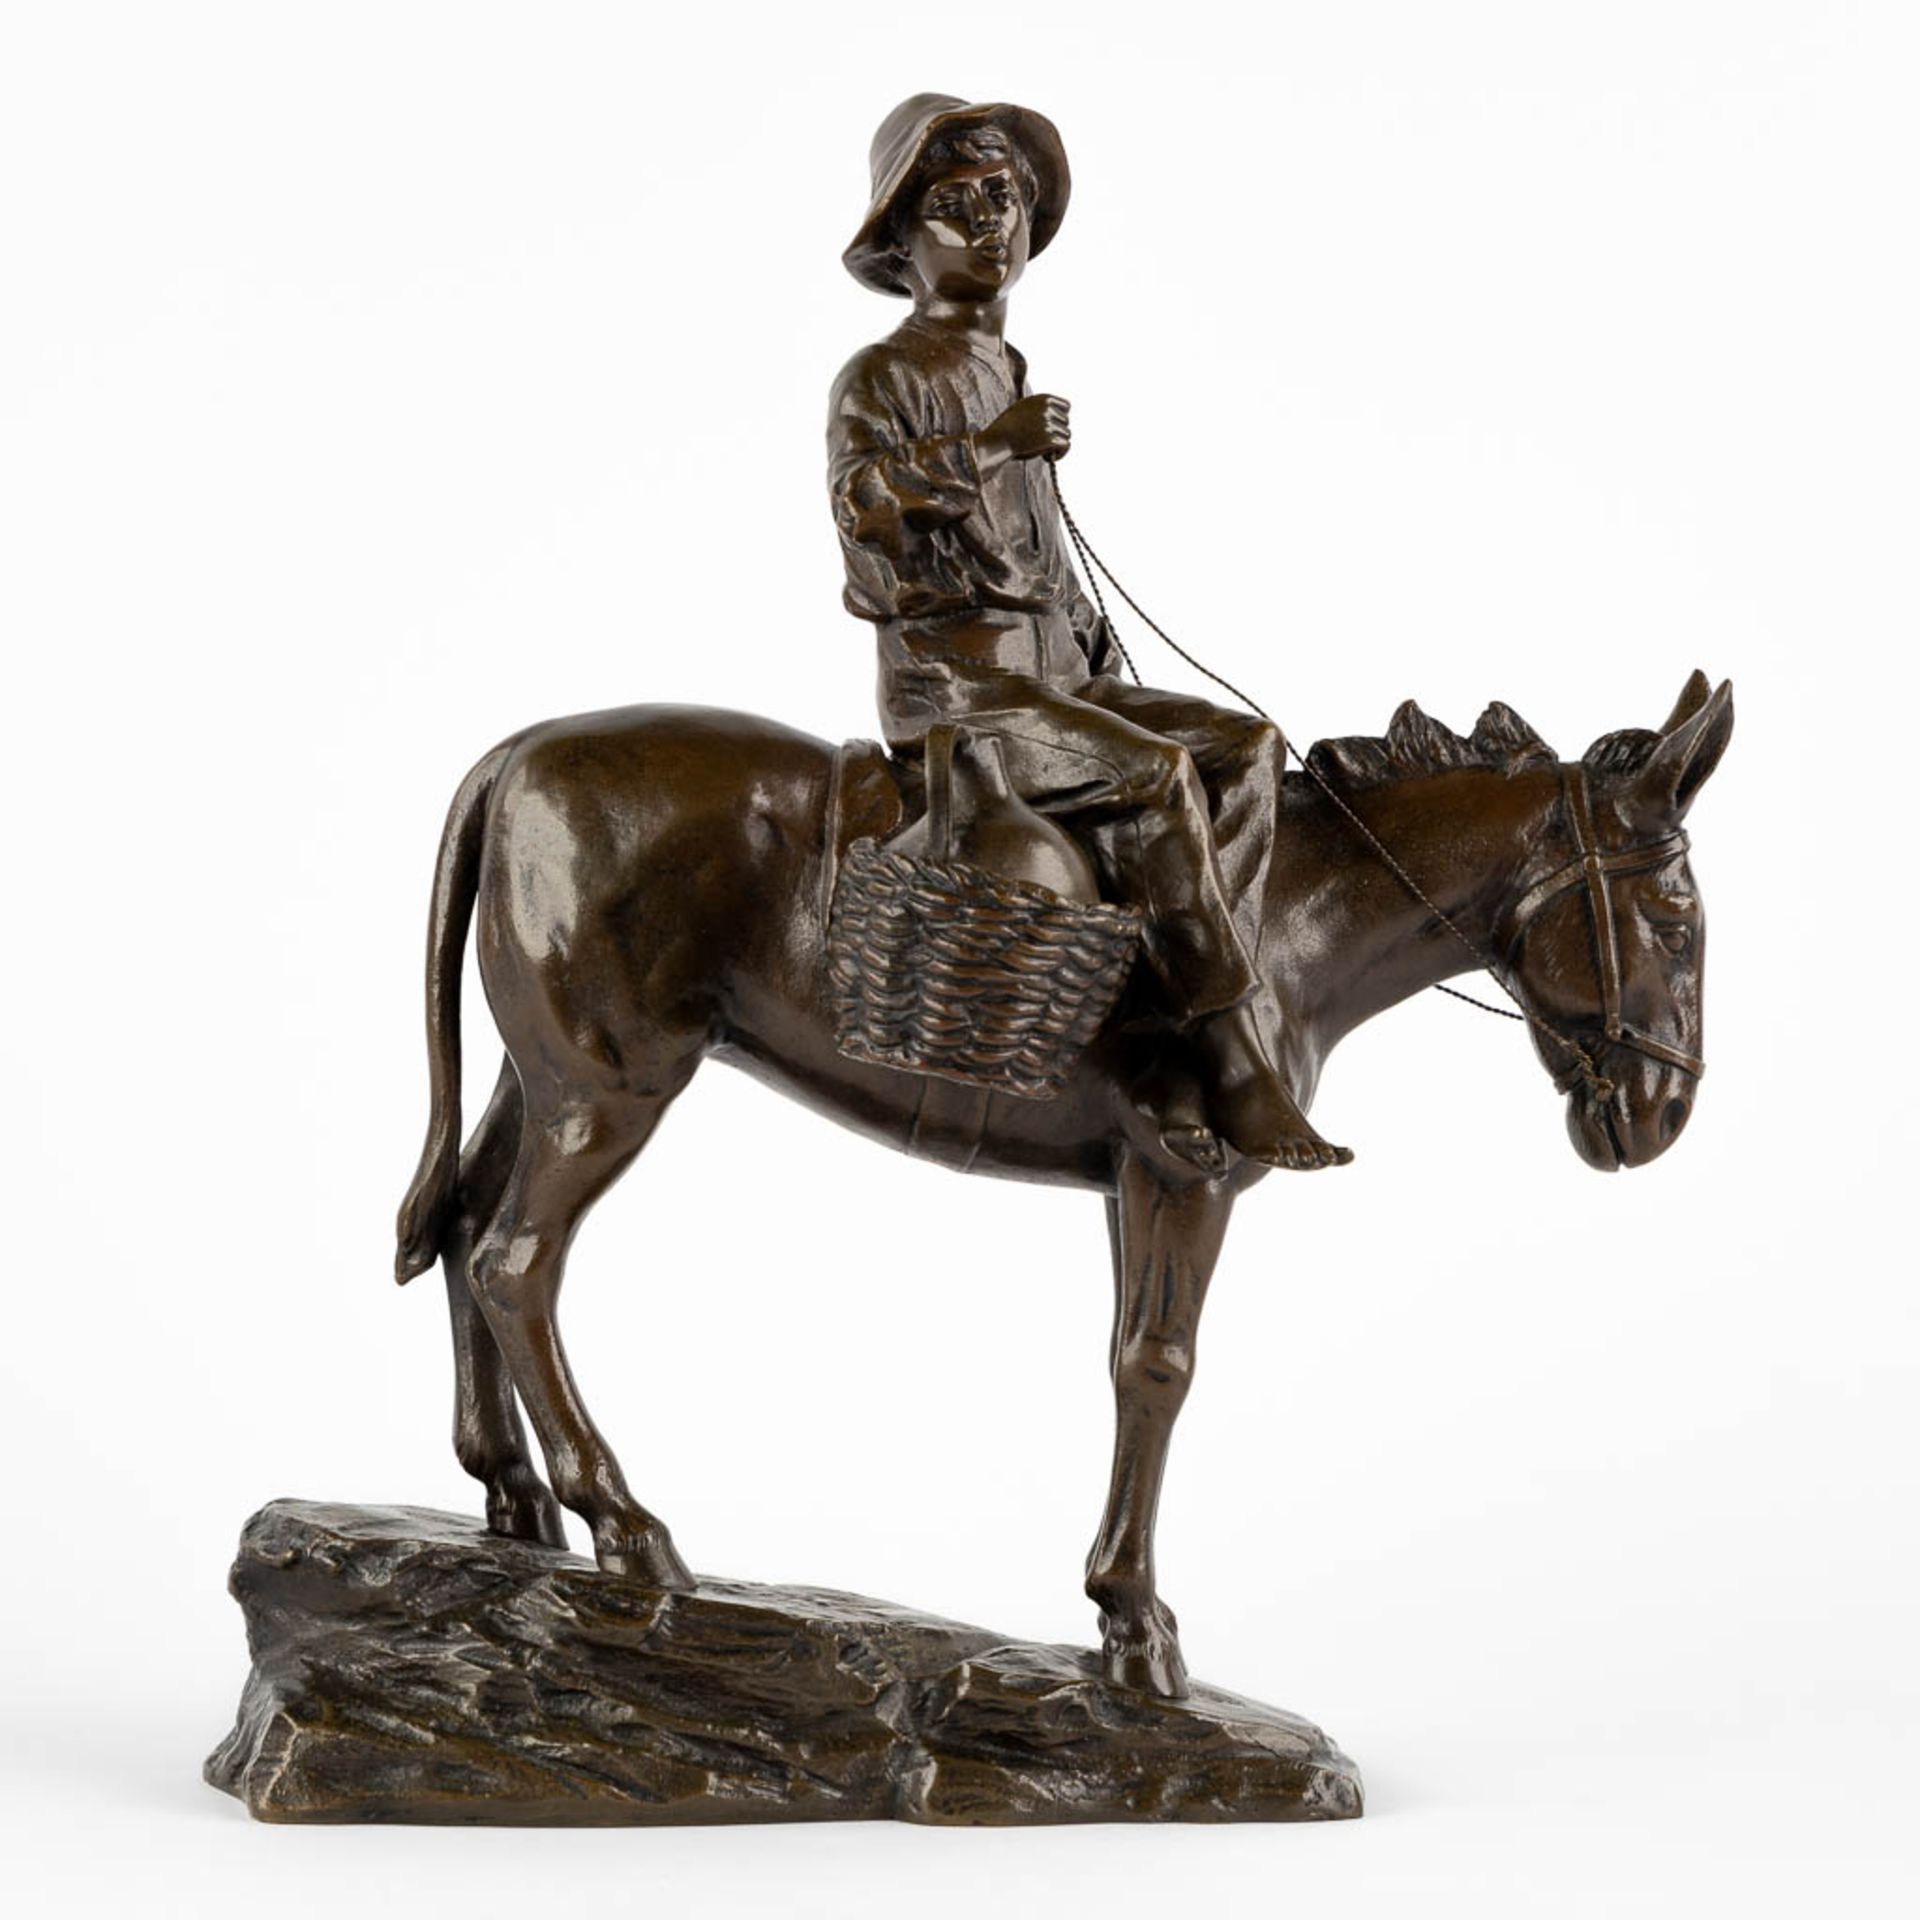 A small figurine of a young man riding a donkey, patinated bronze. Circa 1900. (L:18 x W:28 x H:33 c - Image 3 of 10